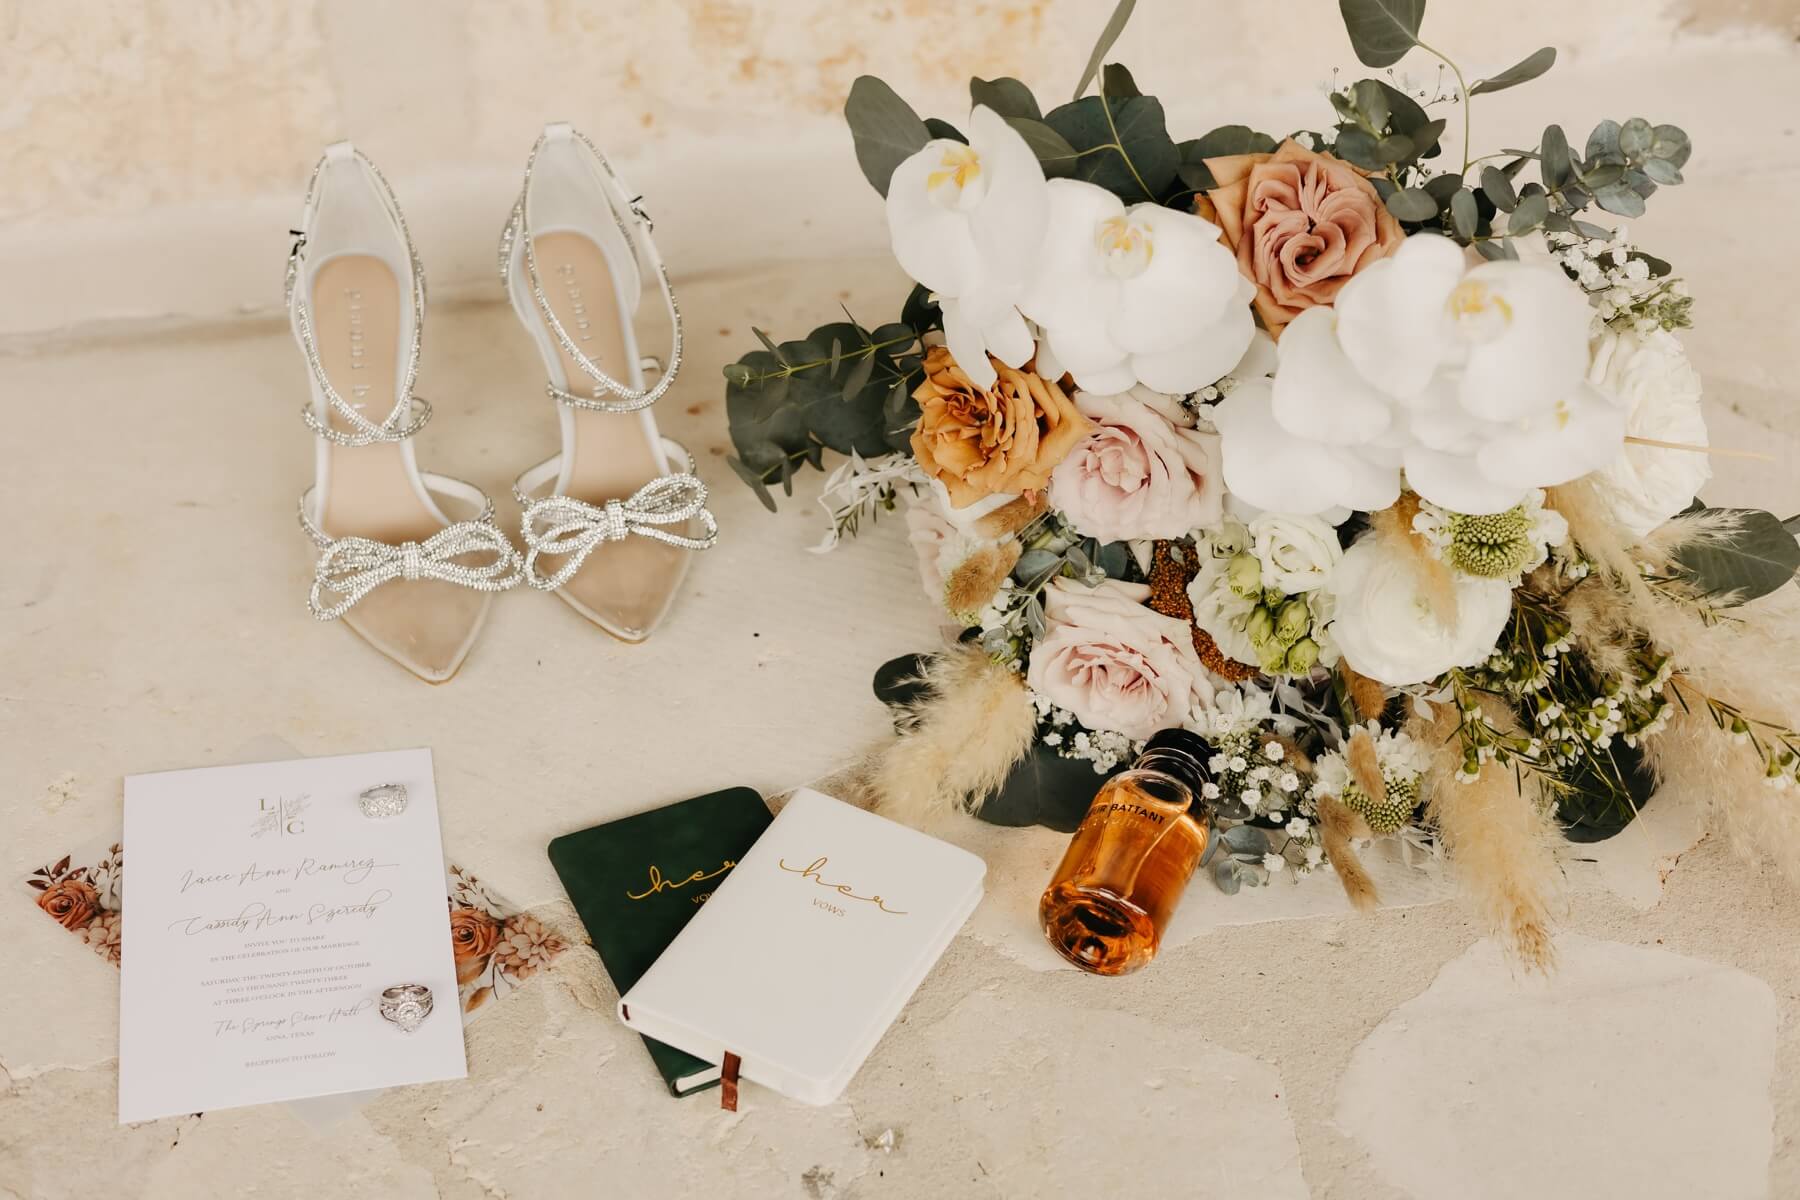 Boho wedding bouquet with crystal bow shoes, wedding invitation, and vow books